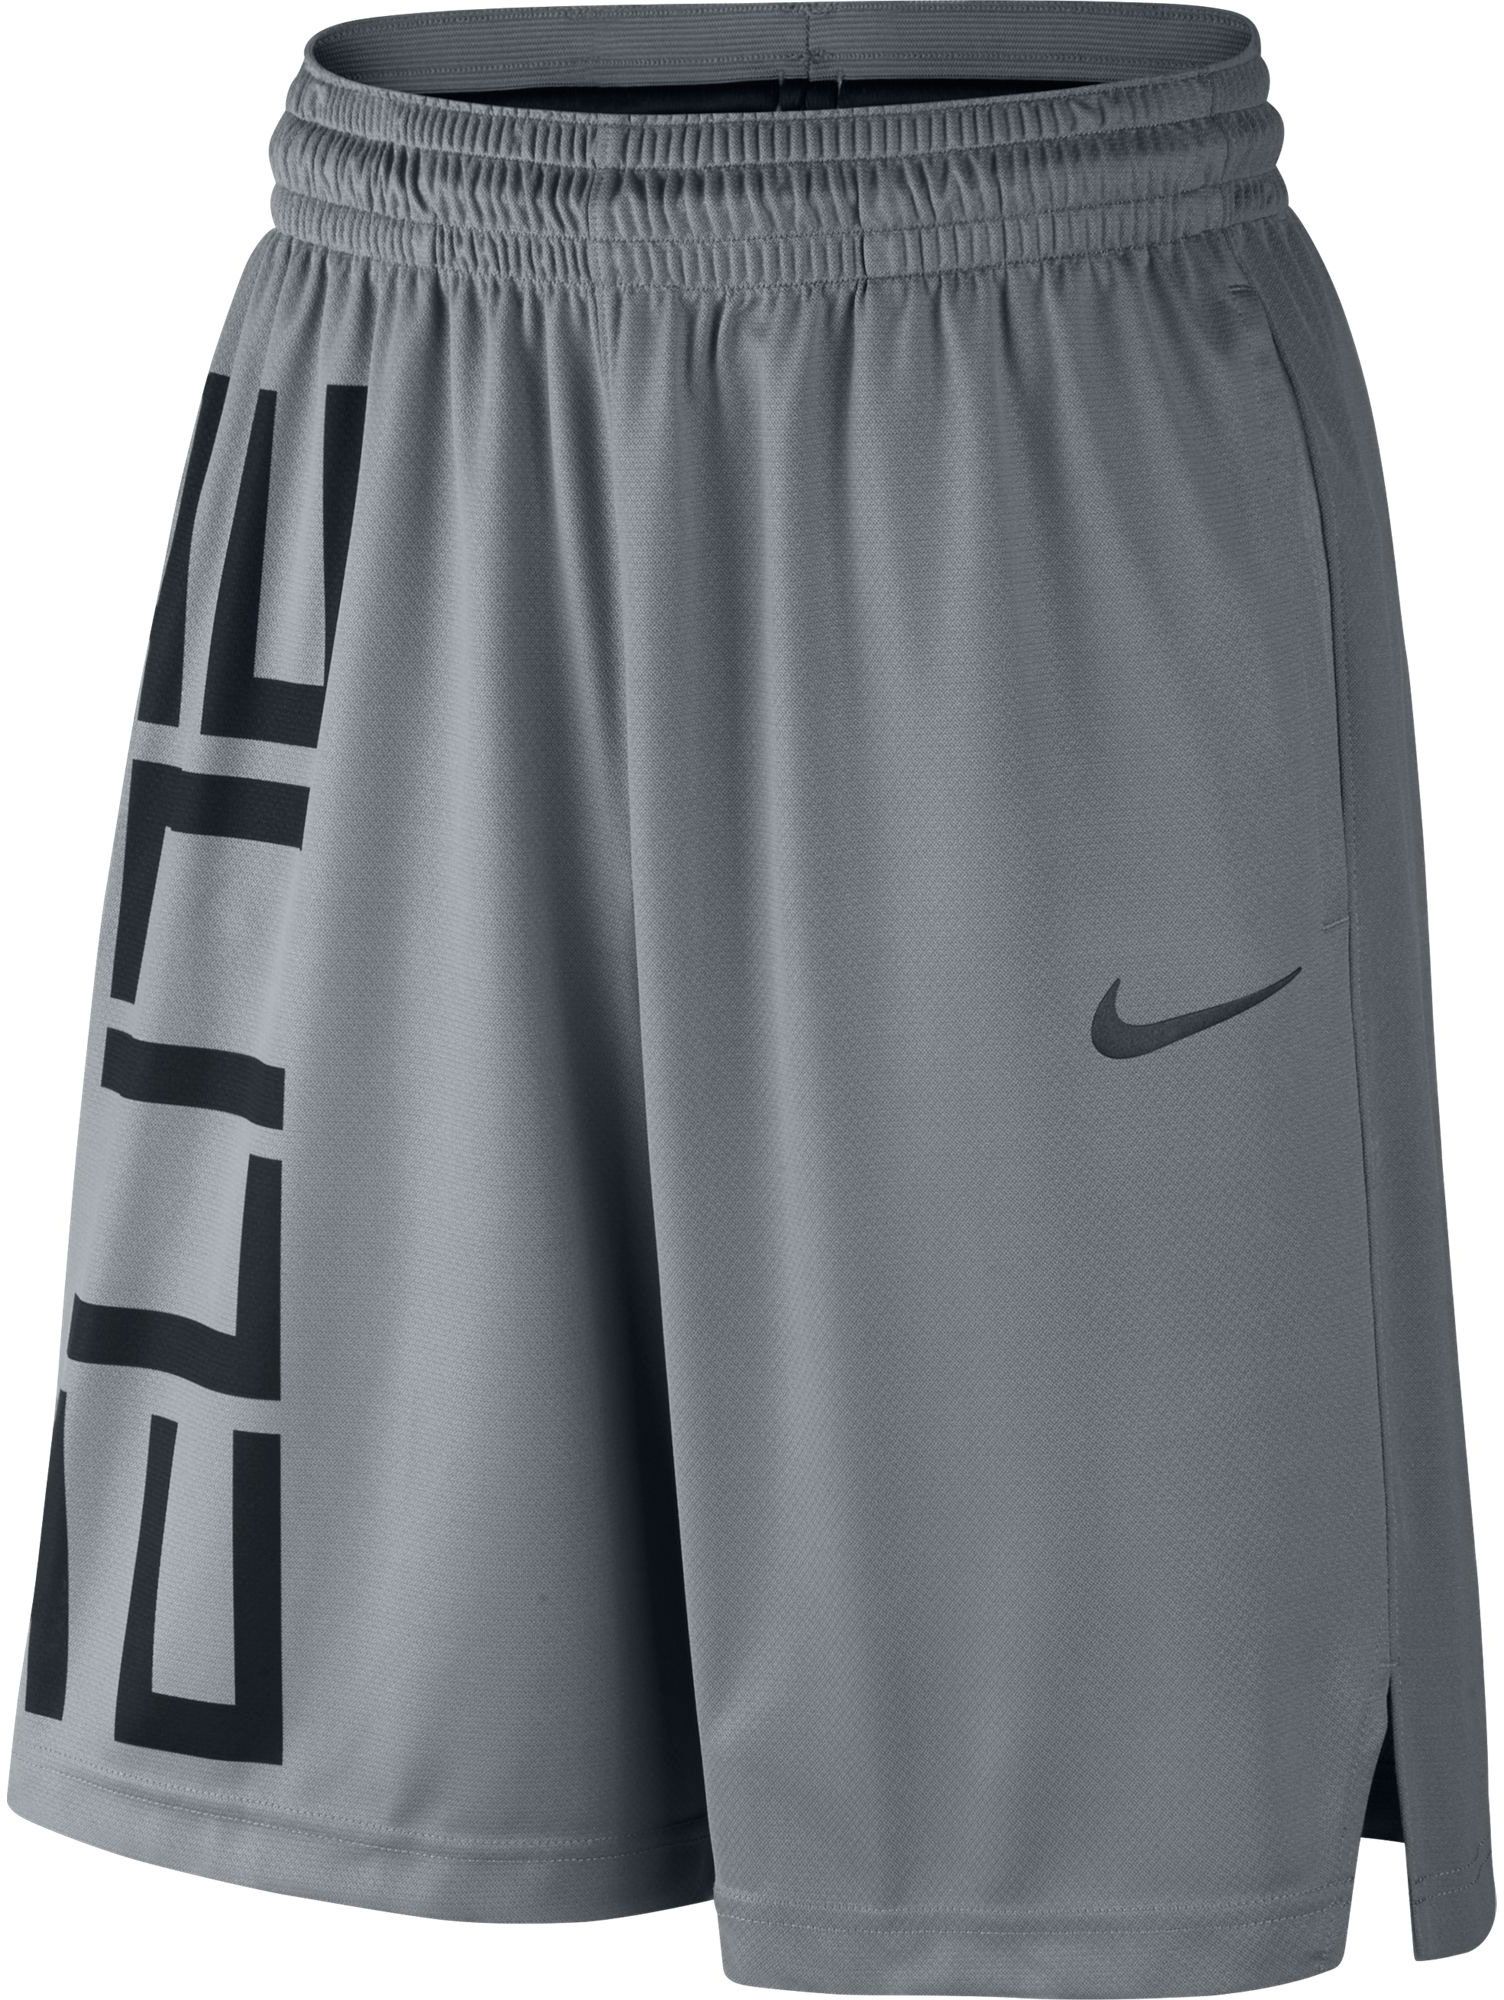 Clearance Men's Shorts | DICK'S Sporting Goods